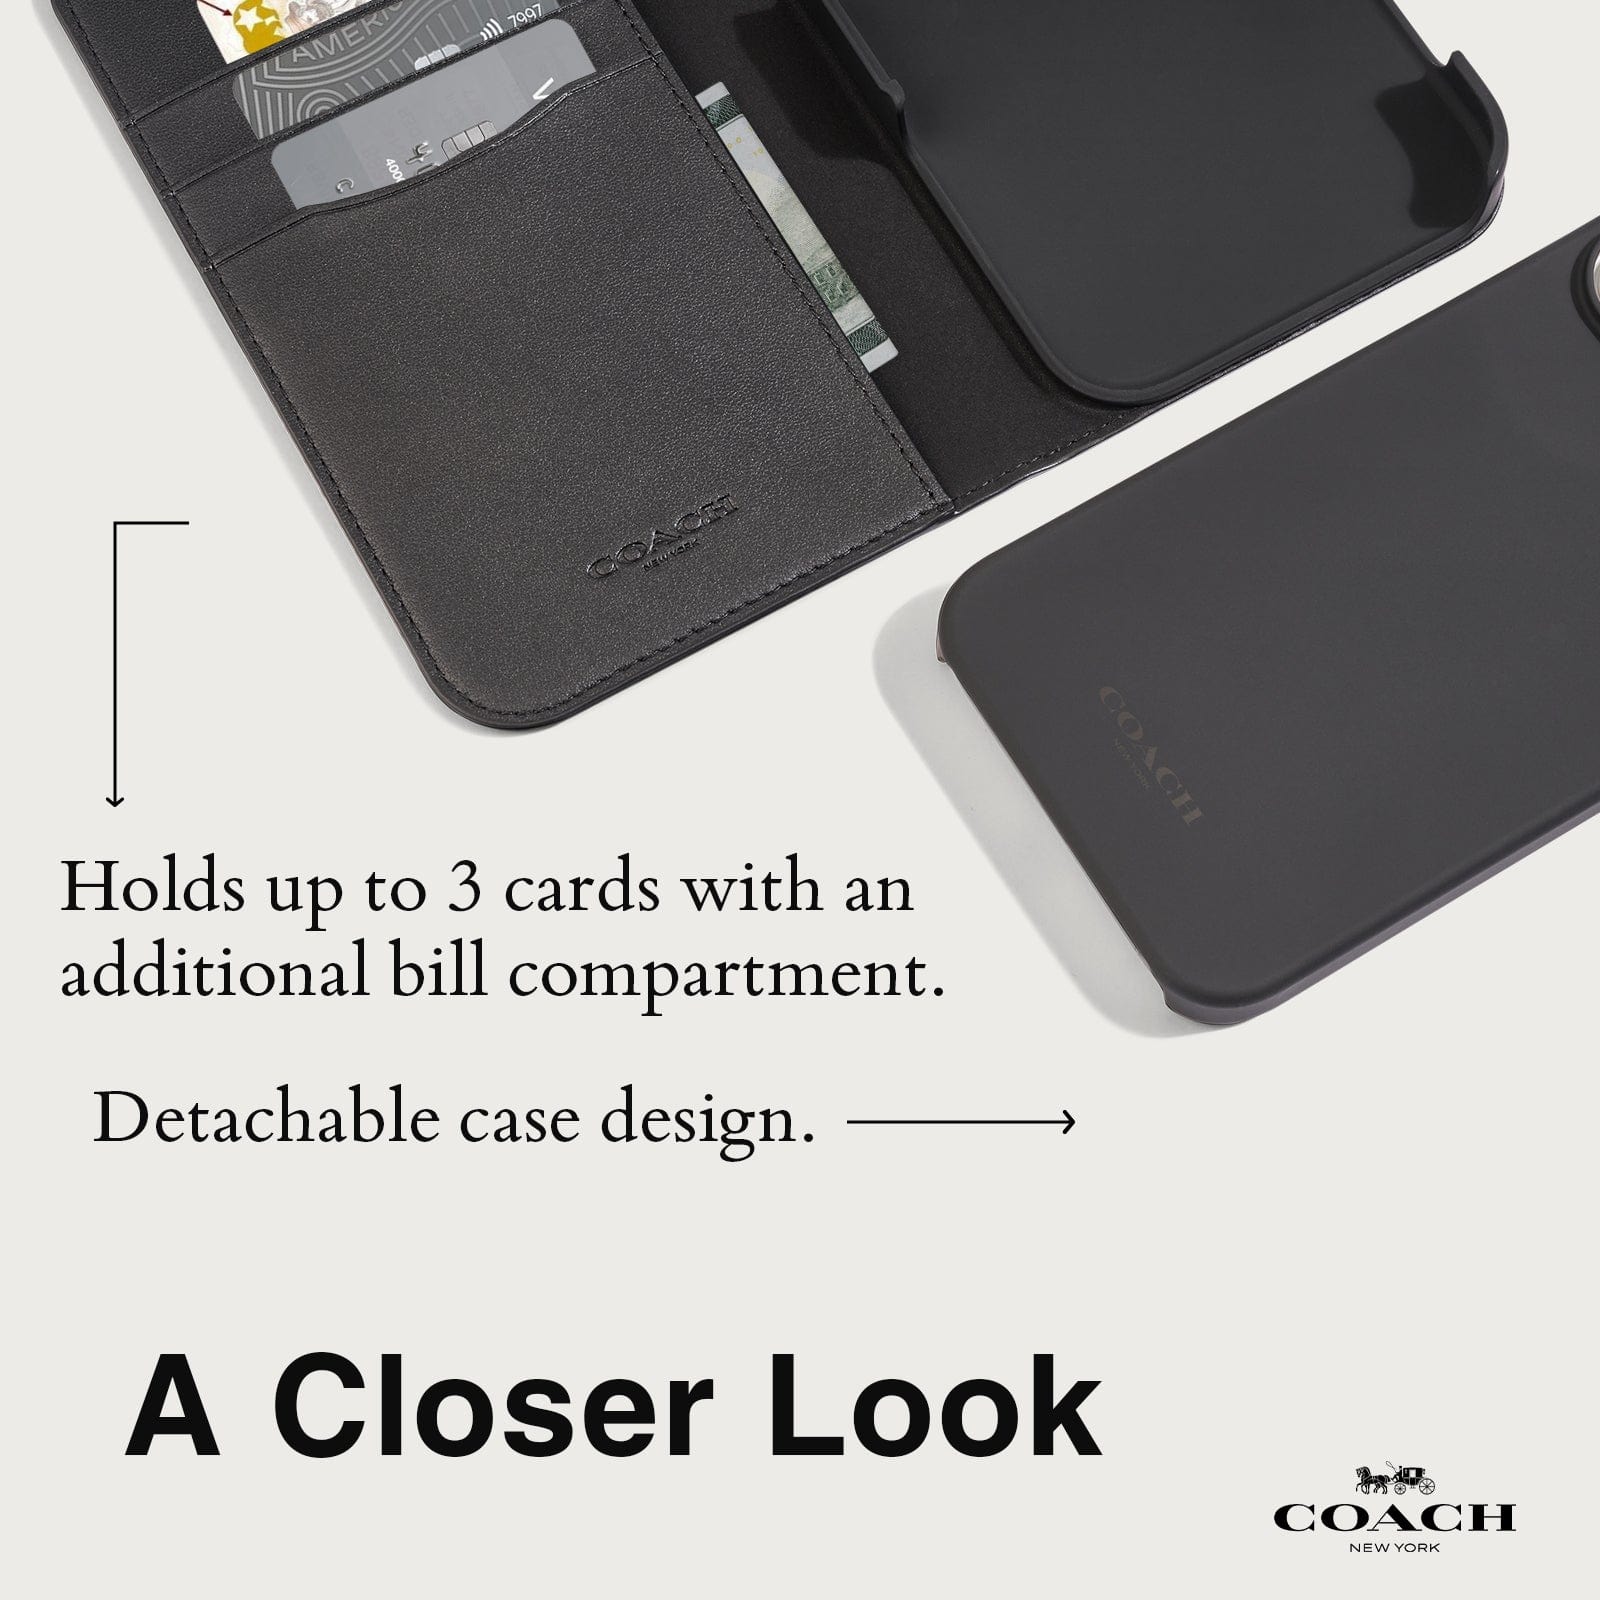 HOLDS UP TO 3 CARDS WITH AN ADDITIONAL BILL COMPARTMENT. DETACHABLE CASE DESIGN. A CLOSER LOOK. 